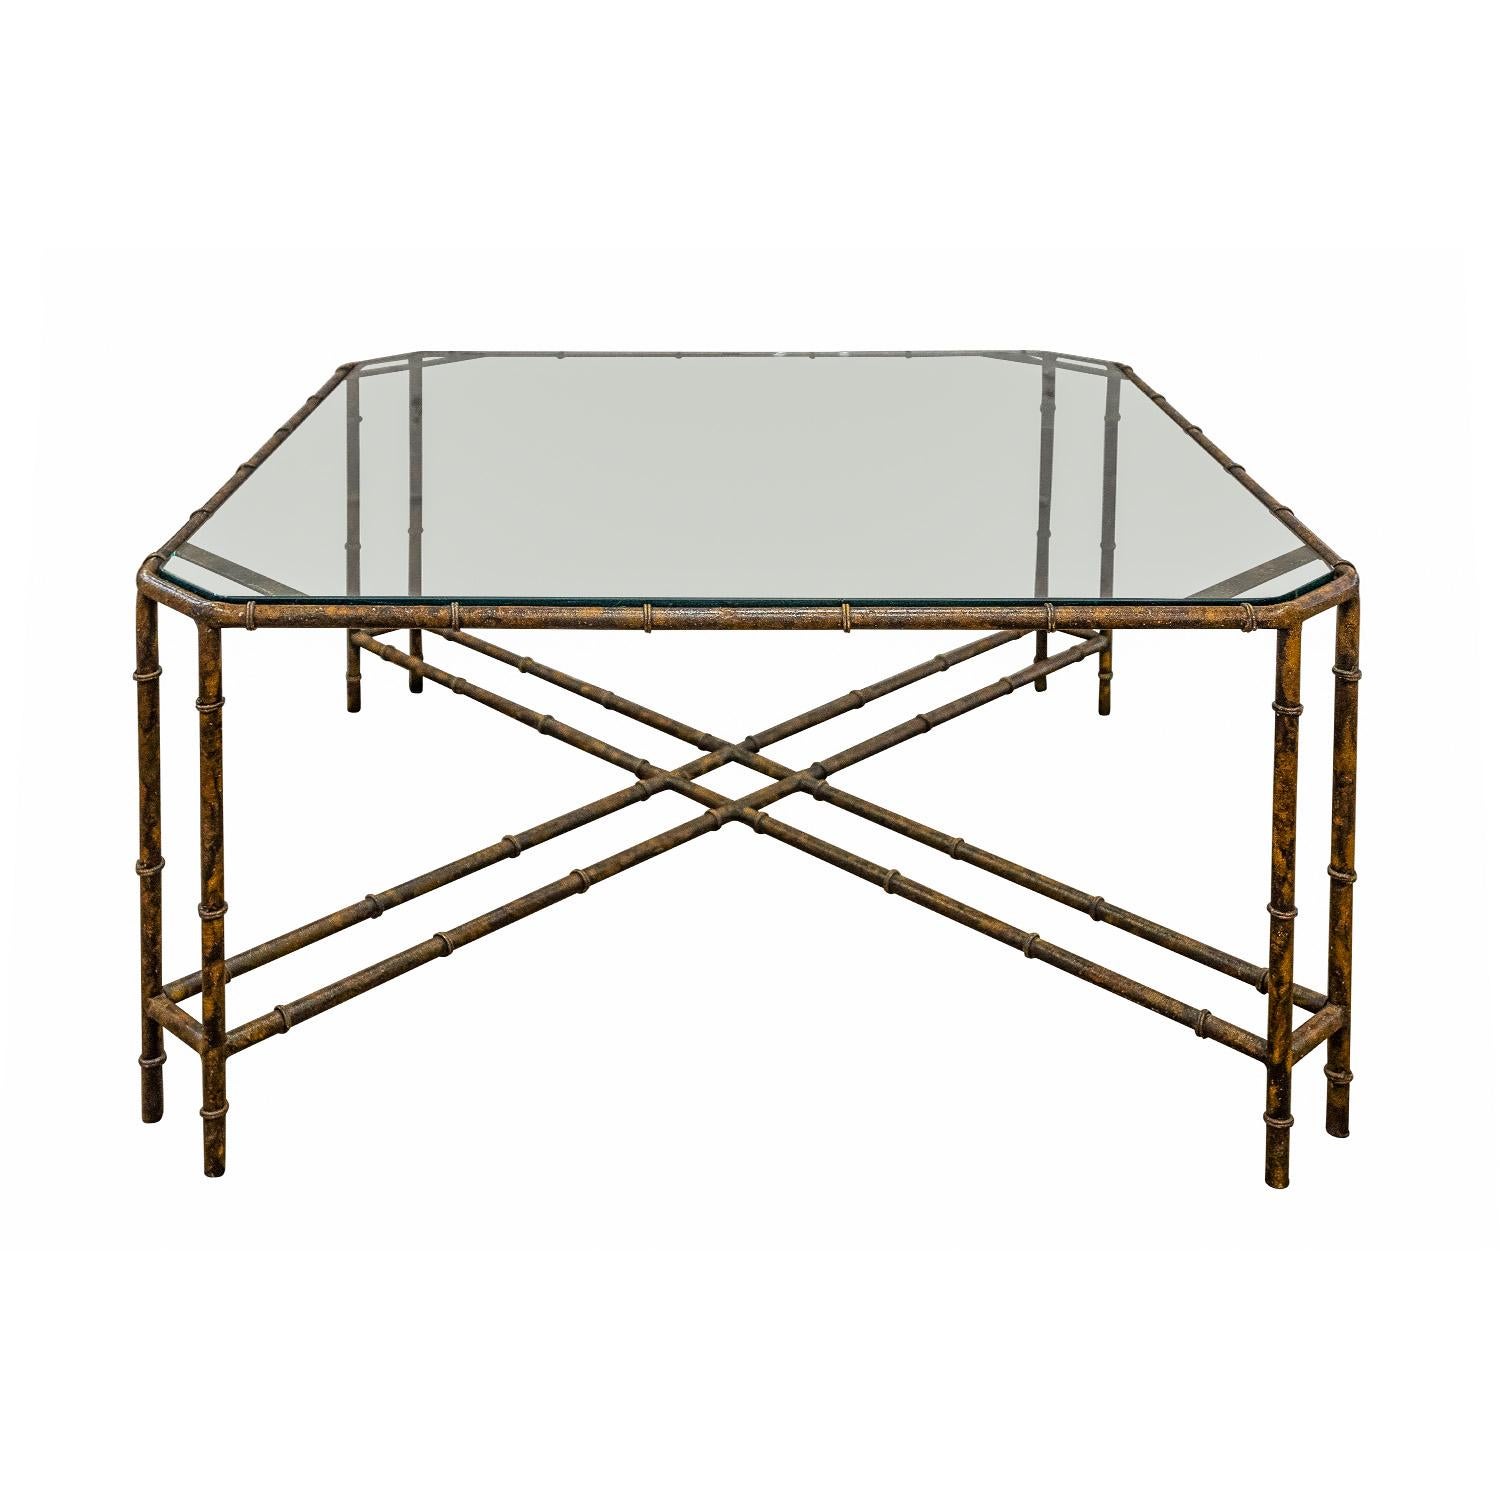 Chic square coffee table in patinated bronze with bamboo motif, chamfered corners and inset glass top, American 1970's.  The double stretcher design is very elegant.  This table would work in any style interior.